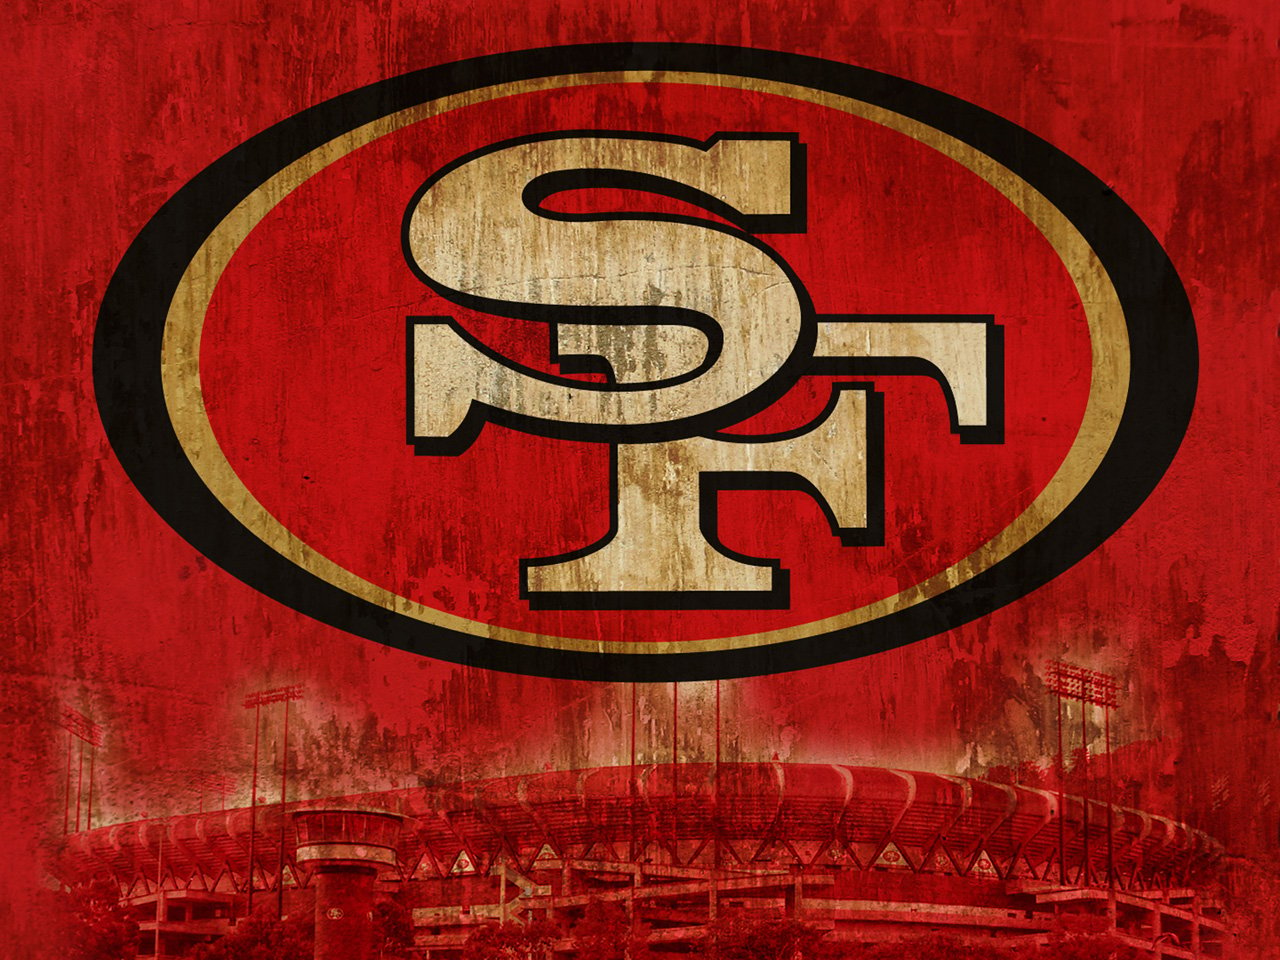 More San Francisco 49ers wallpapers San Francisco 49ers wallpapers 1280x960